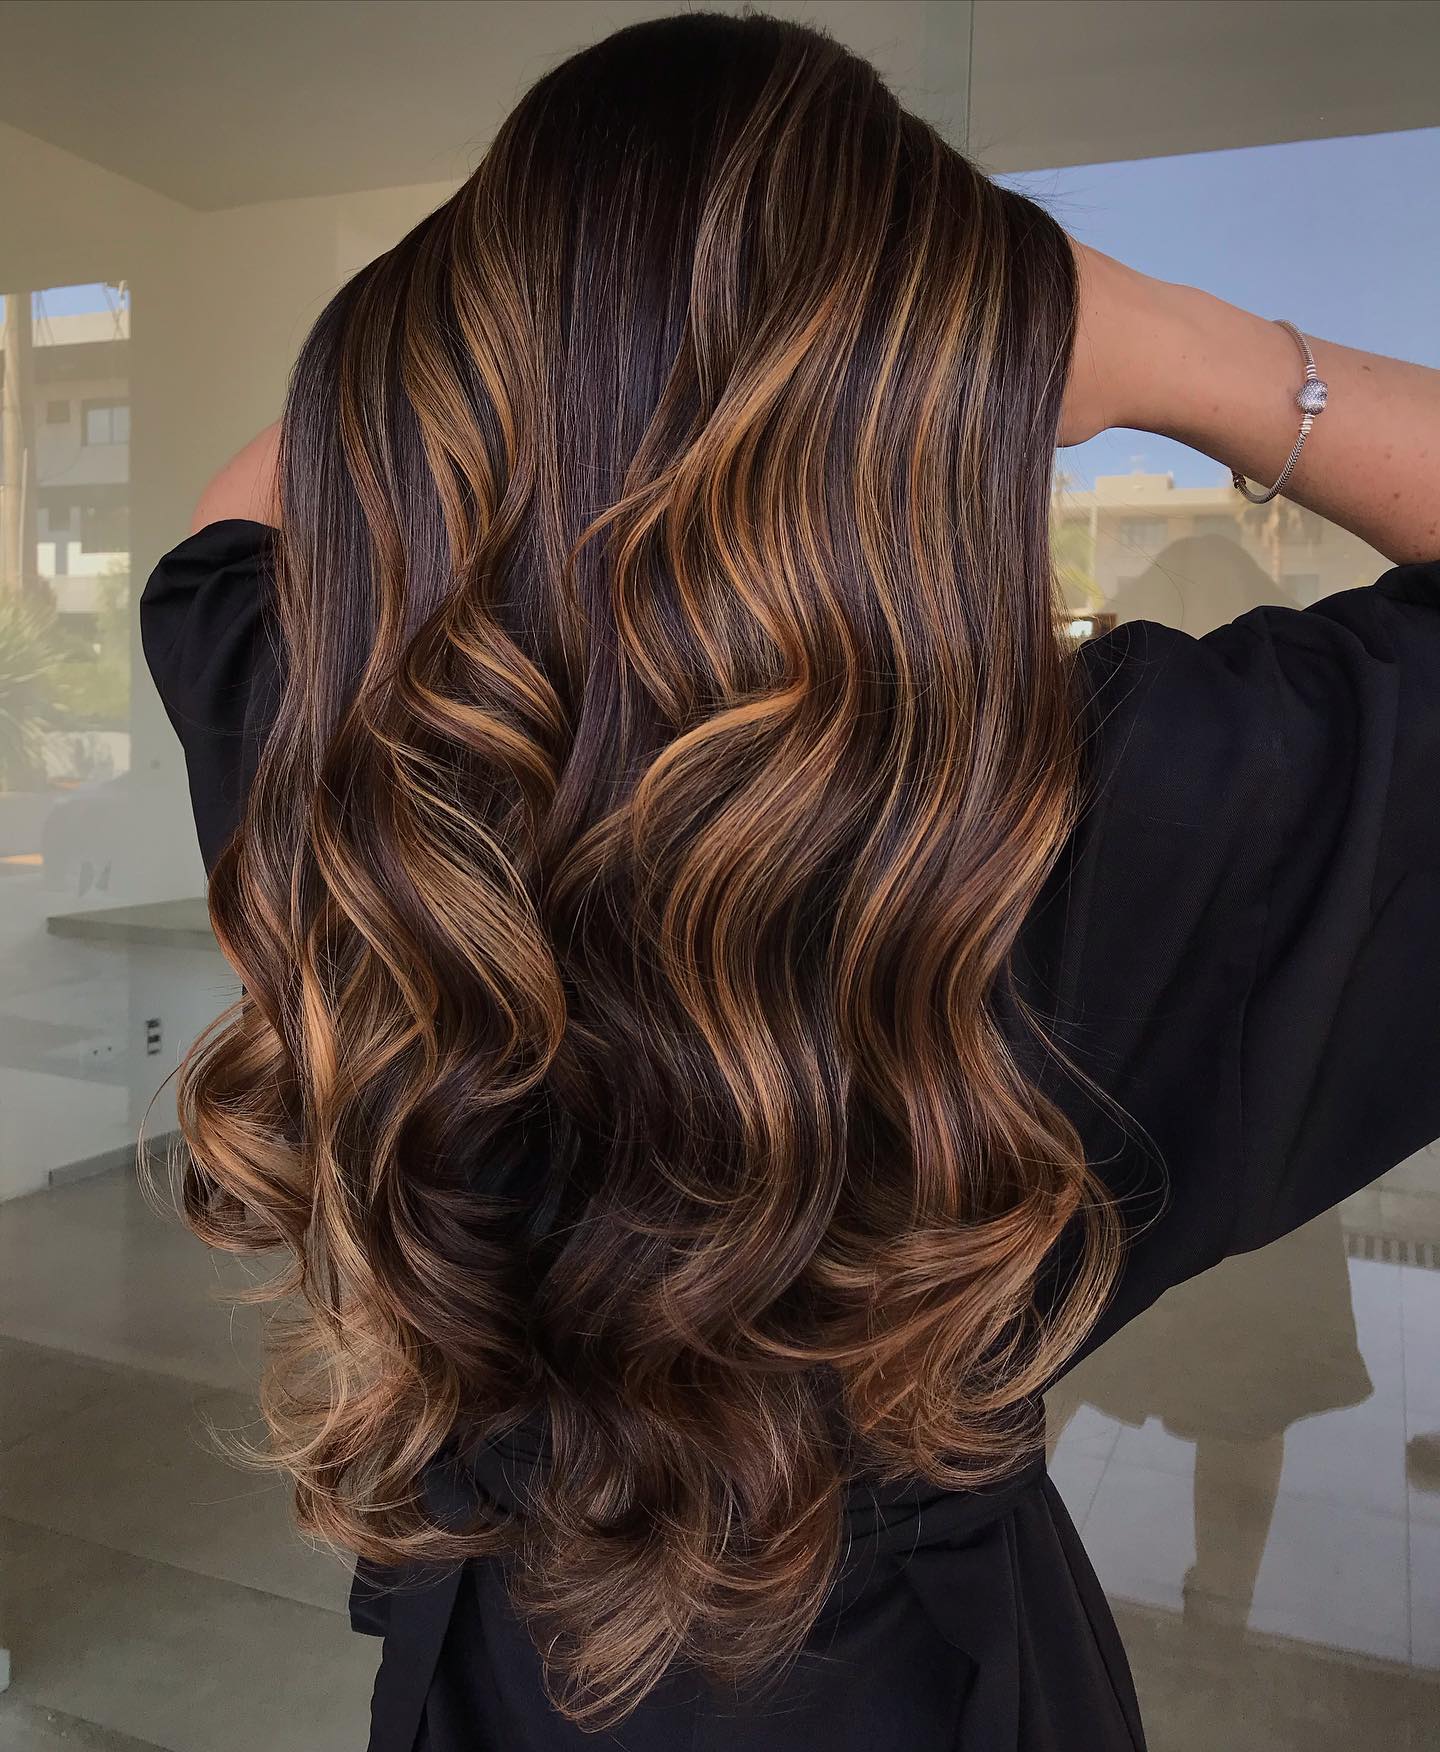 Long Wavy Brown Hair with Orange Highlights